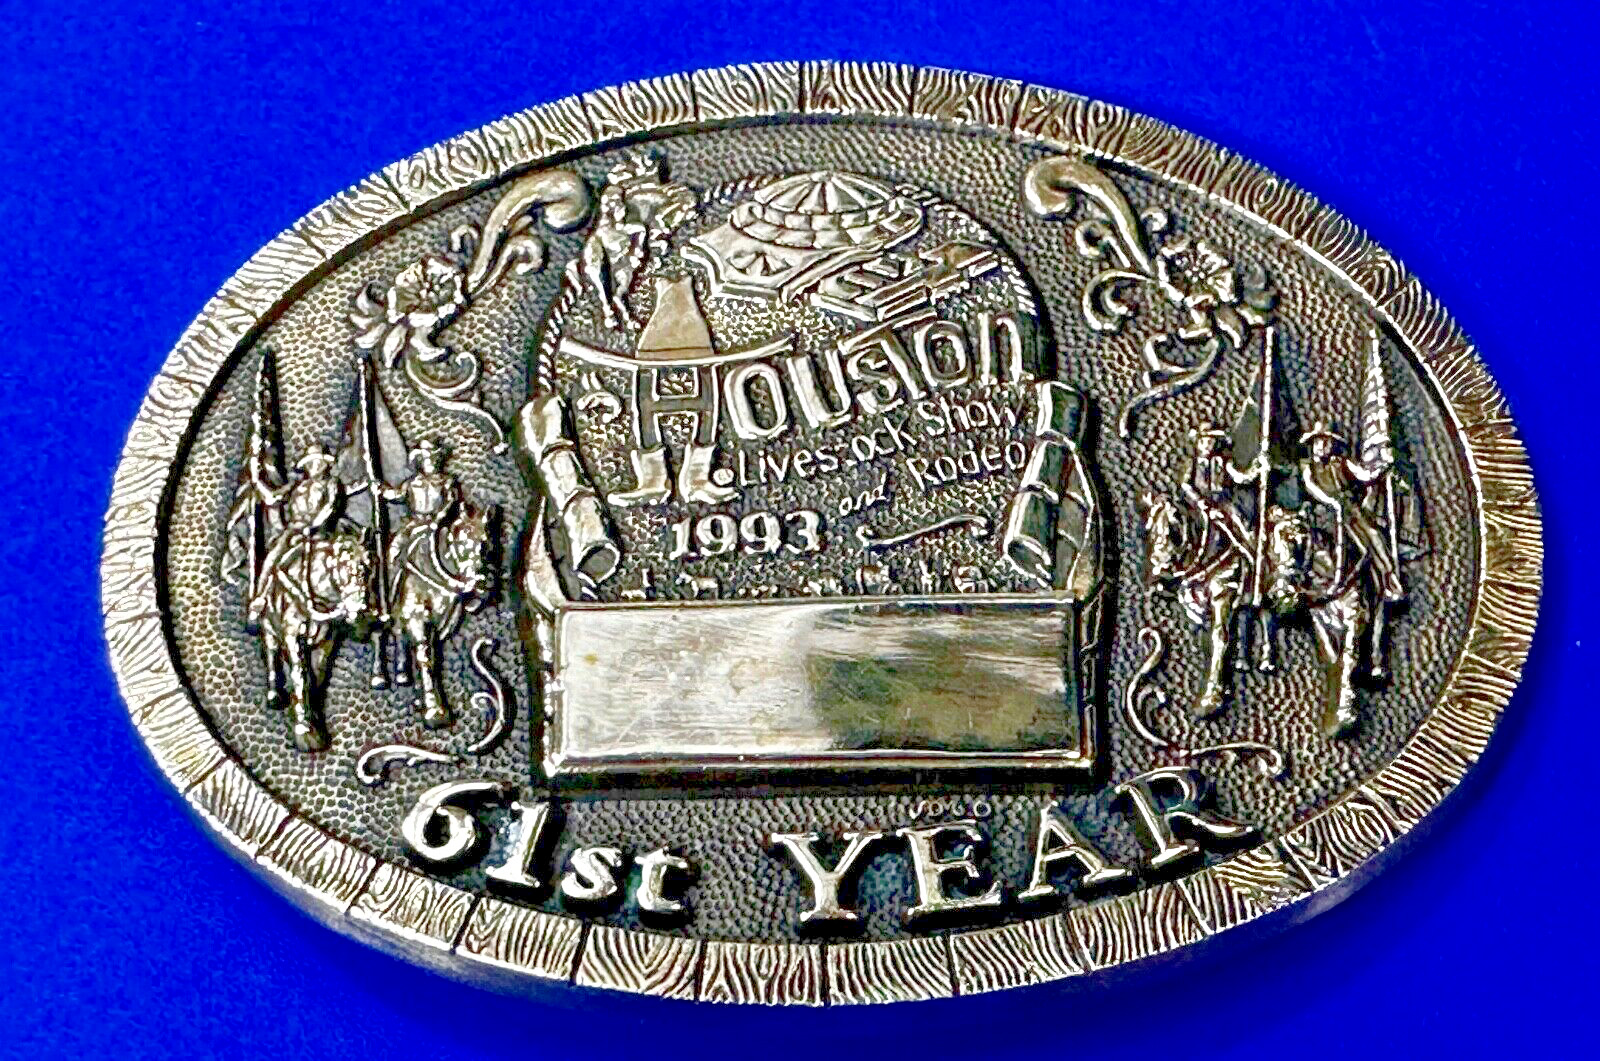 Houston Livestock Show and Rodeo 61st Year VTG 1993 First Edition Belt Buckle